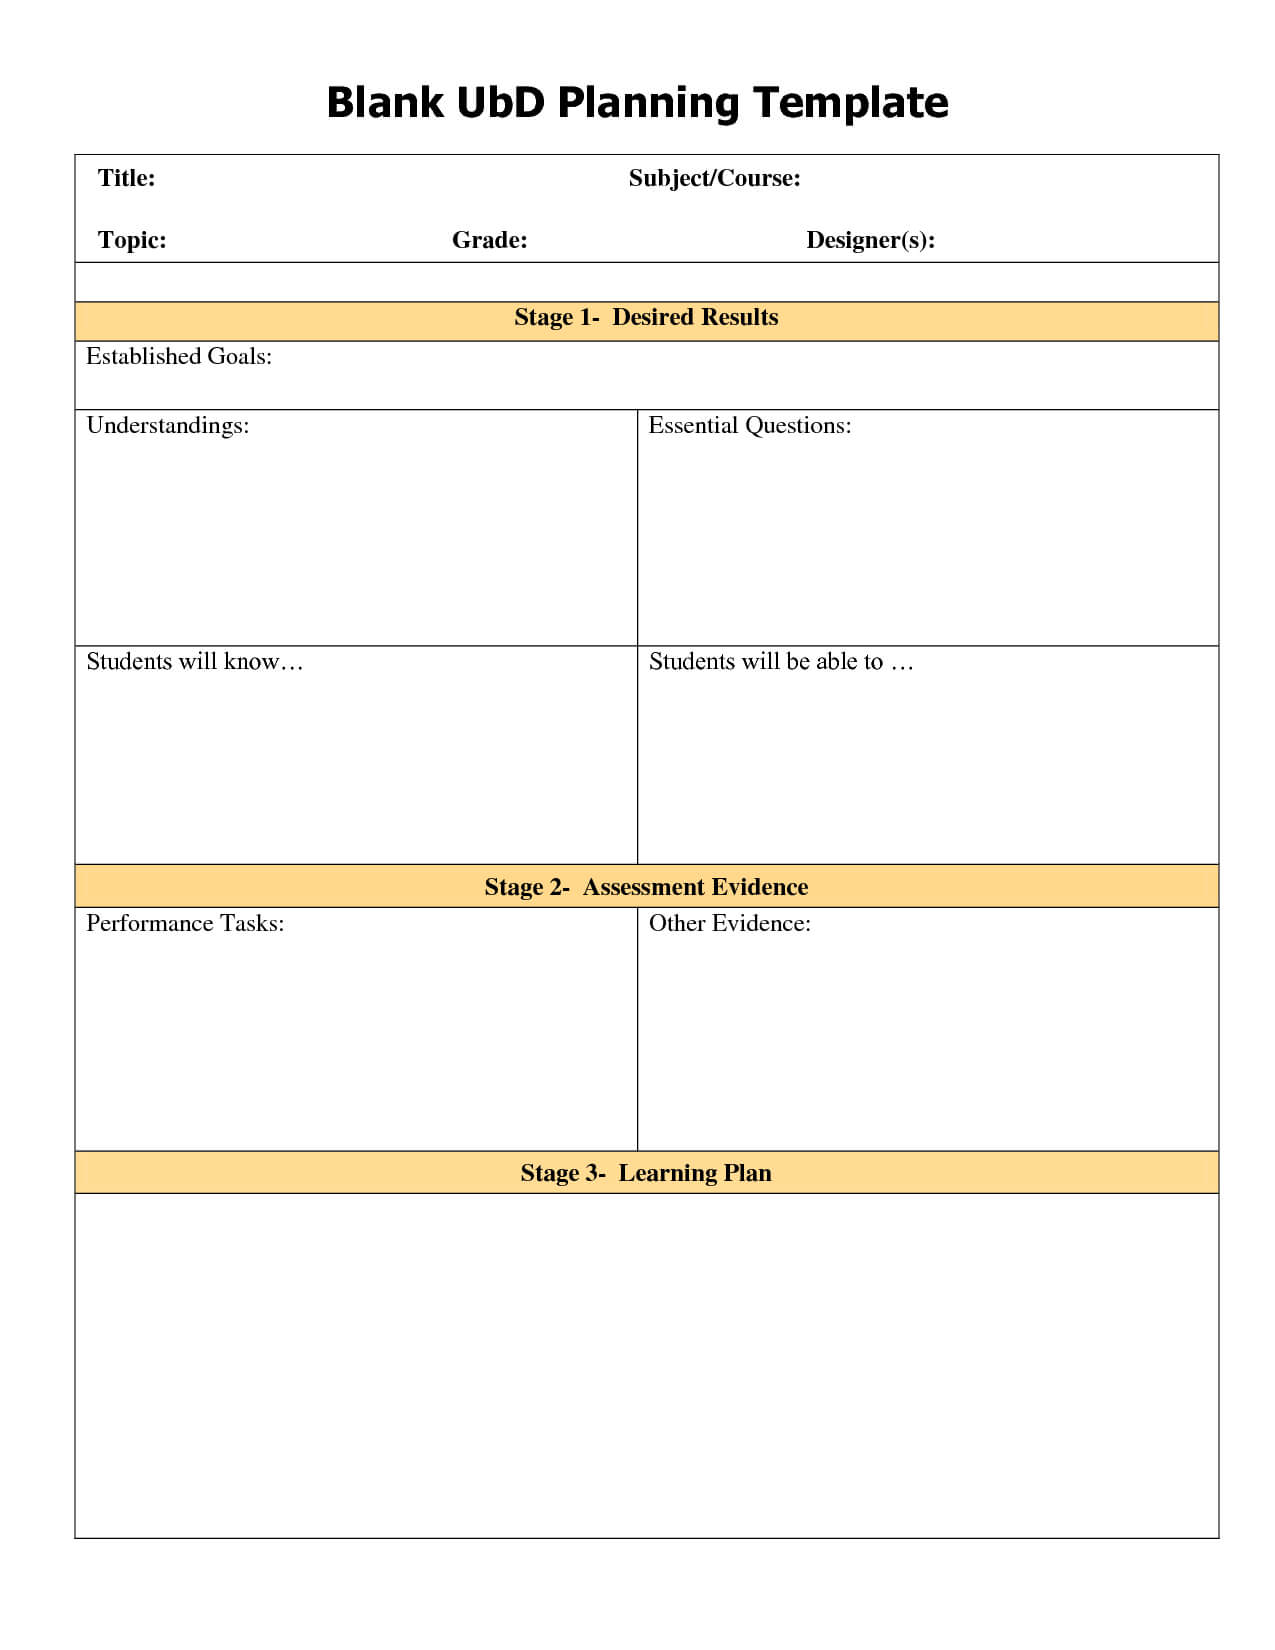 Blank Ubd Template | Blank Ubd Planning Template Intended For Blank Unit Lesson Plan Template